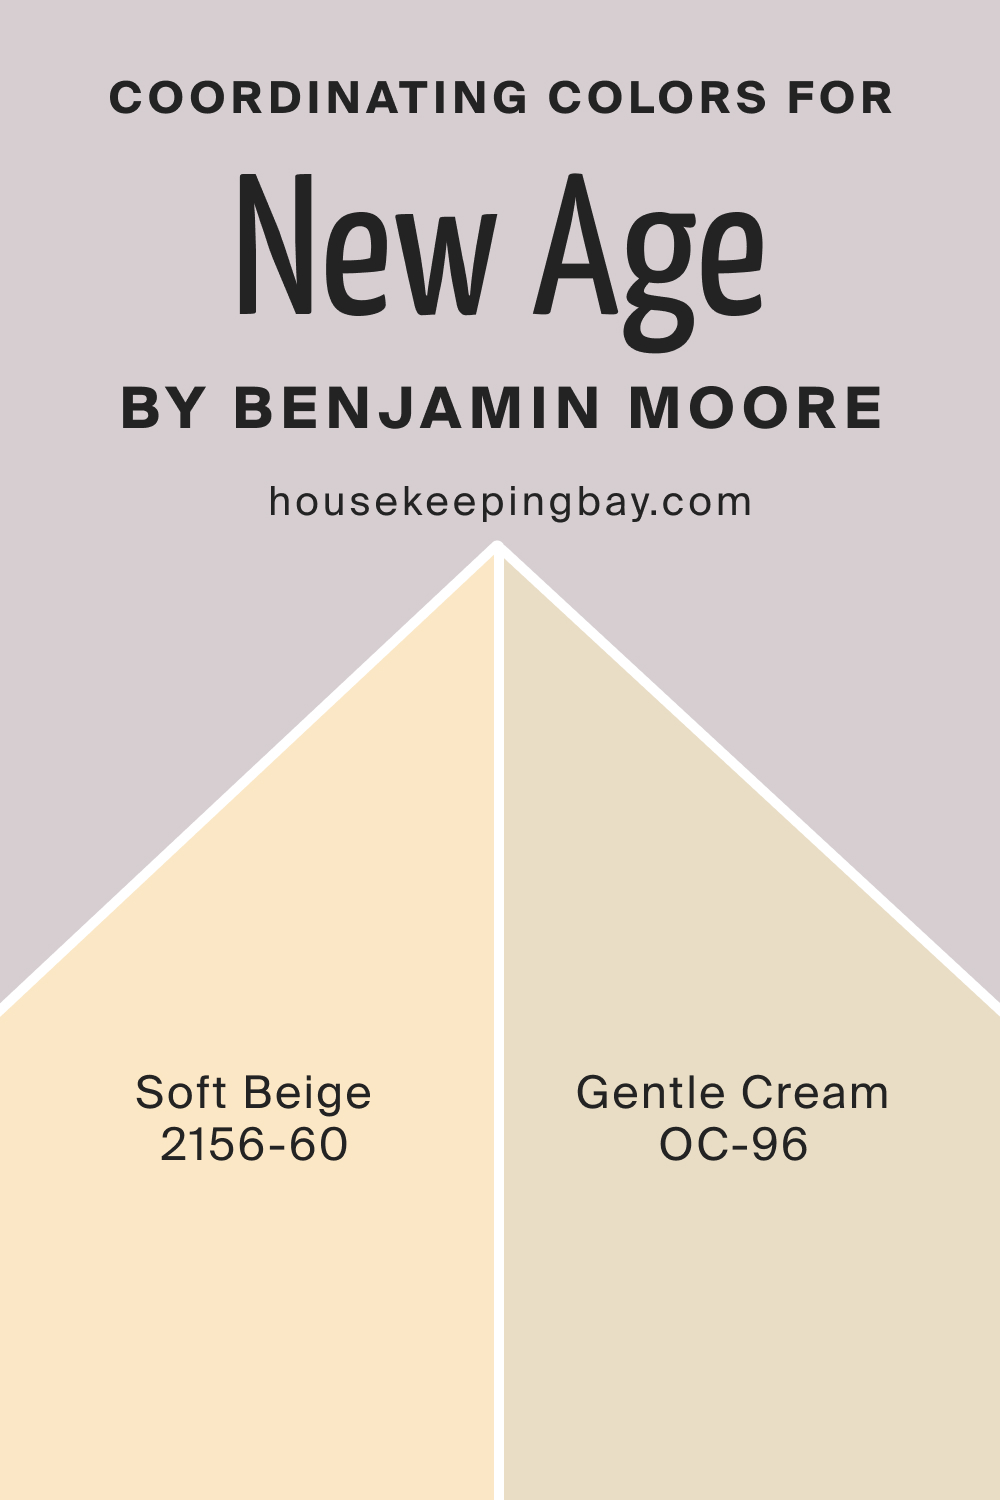 Coordinating Colors for New Age 1444 by Benjamin Moore